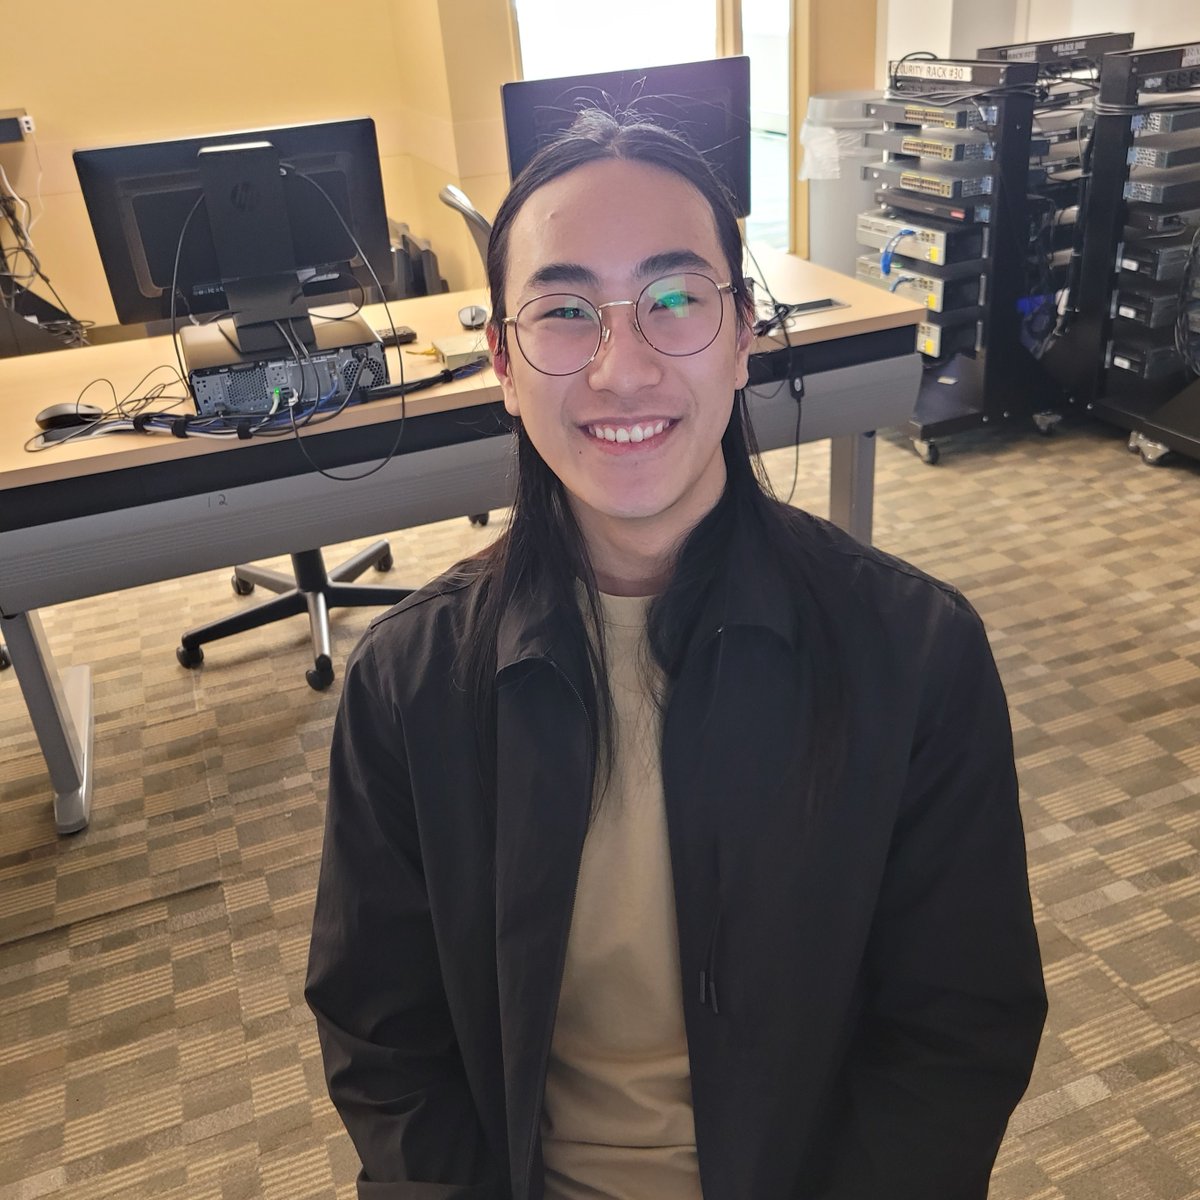 Michael Tse, a CIT student at College of DuPage, showcased his skills in the National Cyber League individual game. Michael secured an impressive 135th place out of 7,399 participants, ranking in the top 1.8% nationally. 👏